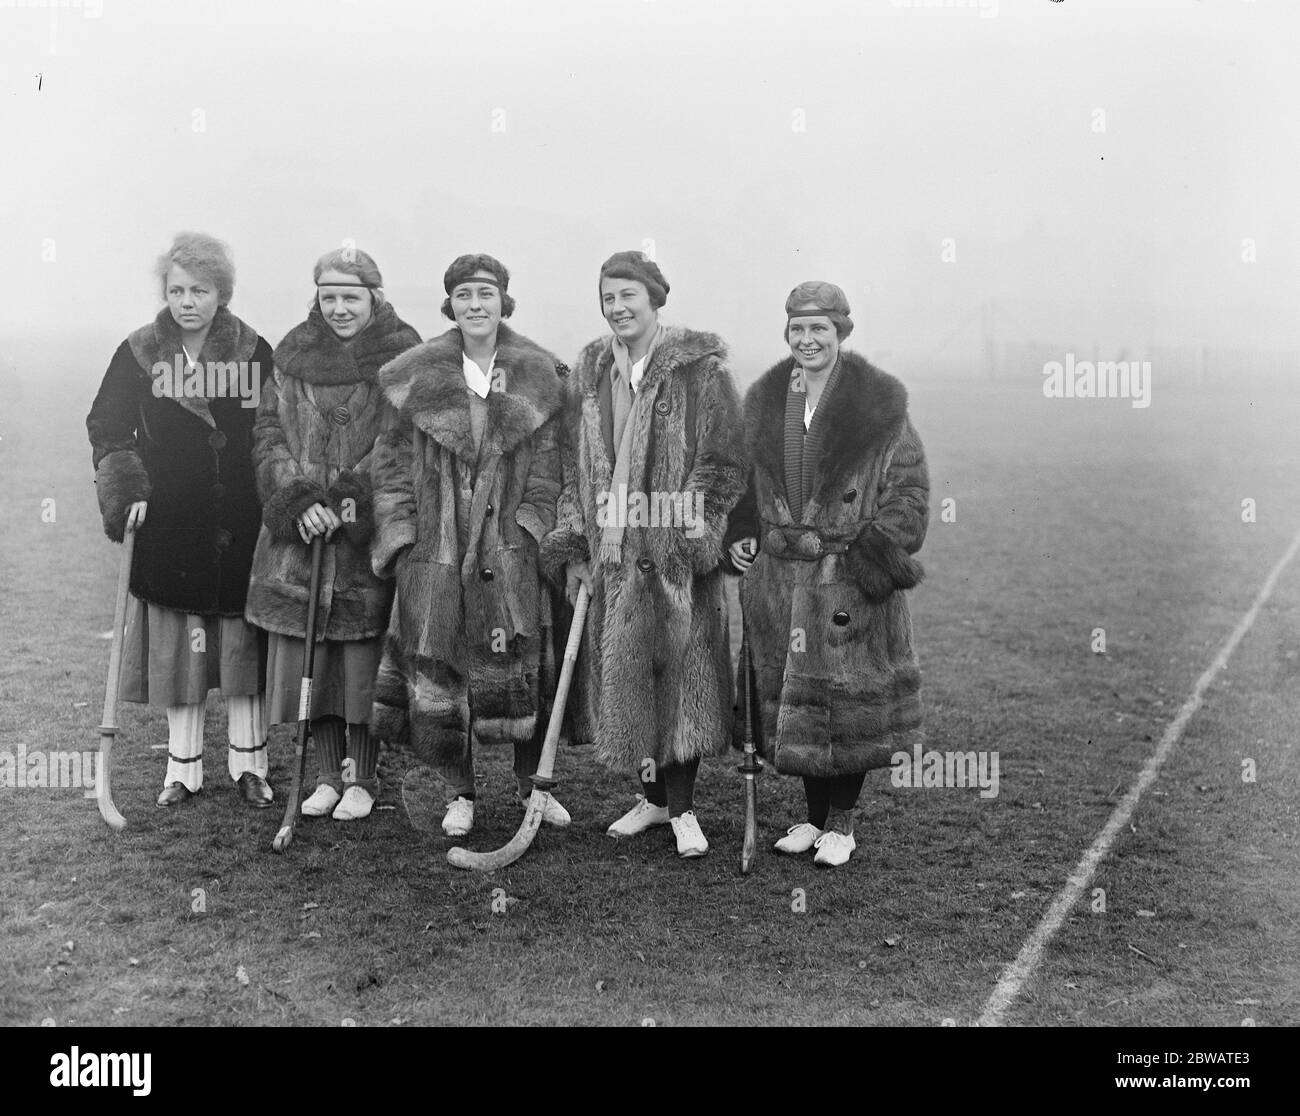 1920 - The first American women's field hockey team, All-Philadelphia team competed internationally. Their application to the 1920 Olympics in Antwerp was denied, but they played in an English tournament and lost both games America ' s lady ' s hockey players first match in England . Five members of the American team photographed before the match wearing magnificent fur coats . Left to right Misses Fioley , F Ross , A Bergen , E CHester the Captain ) and E Weiner 4 November 1920 Stock Photo